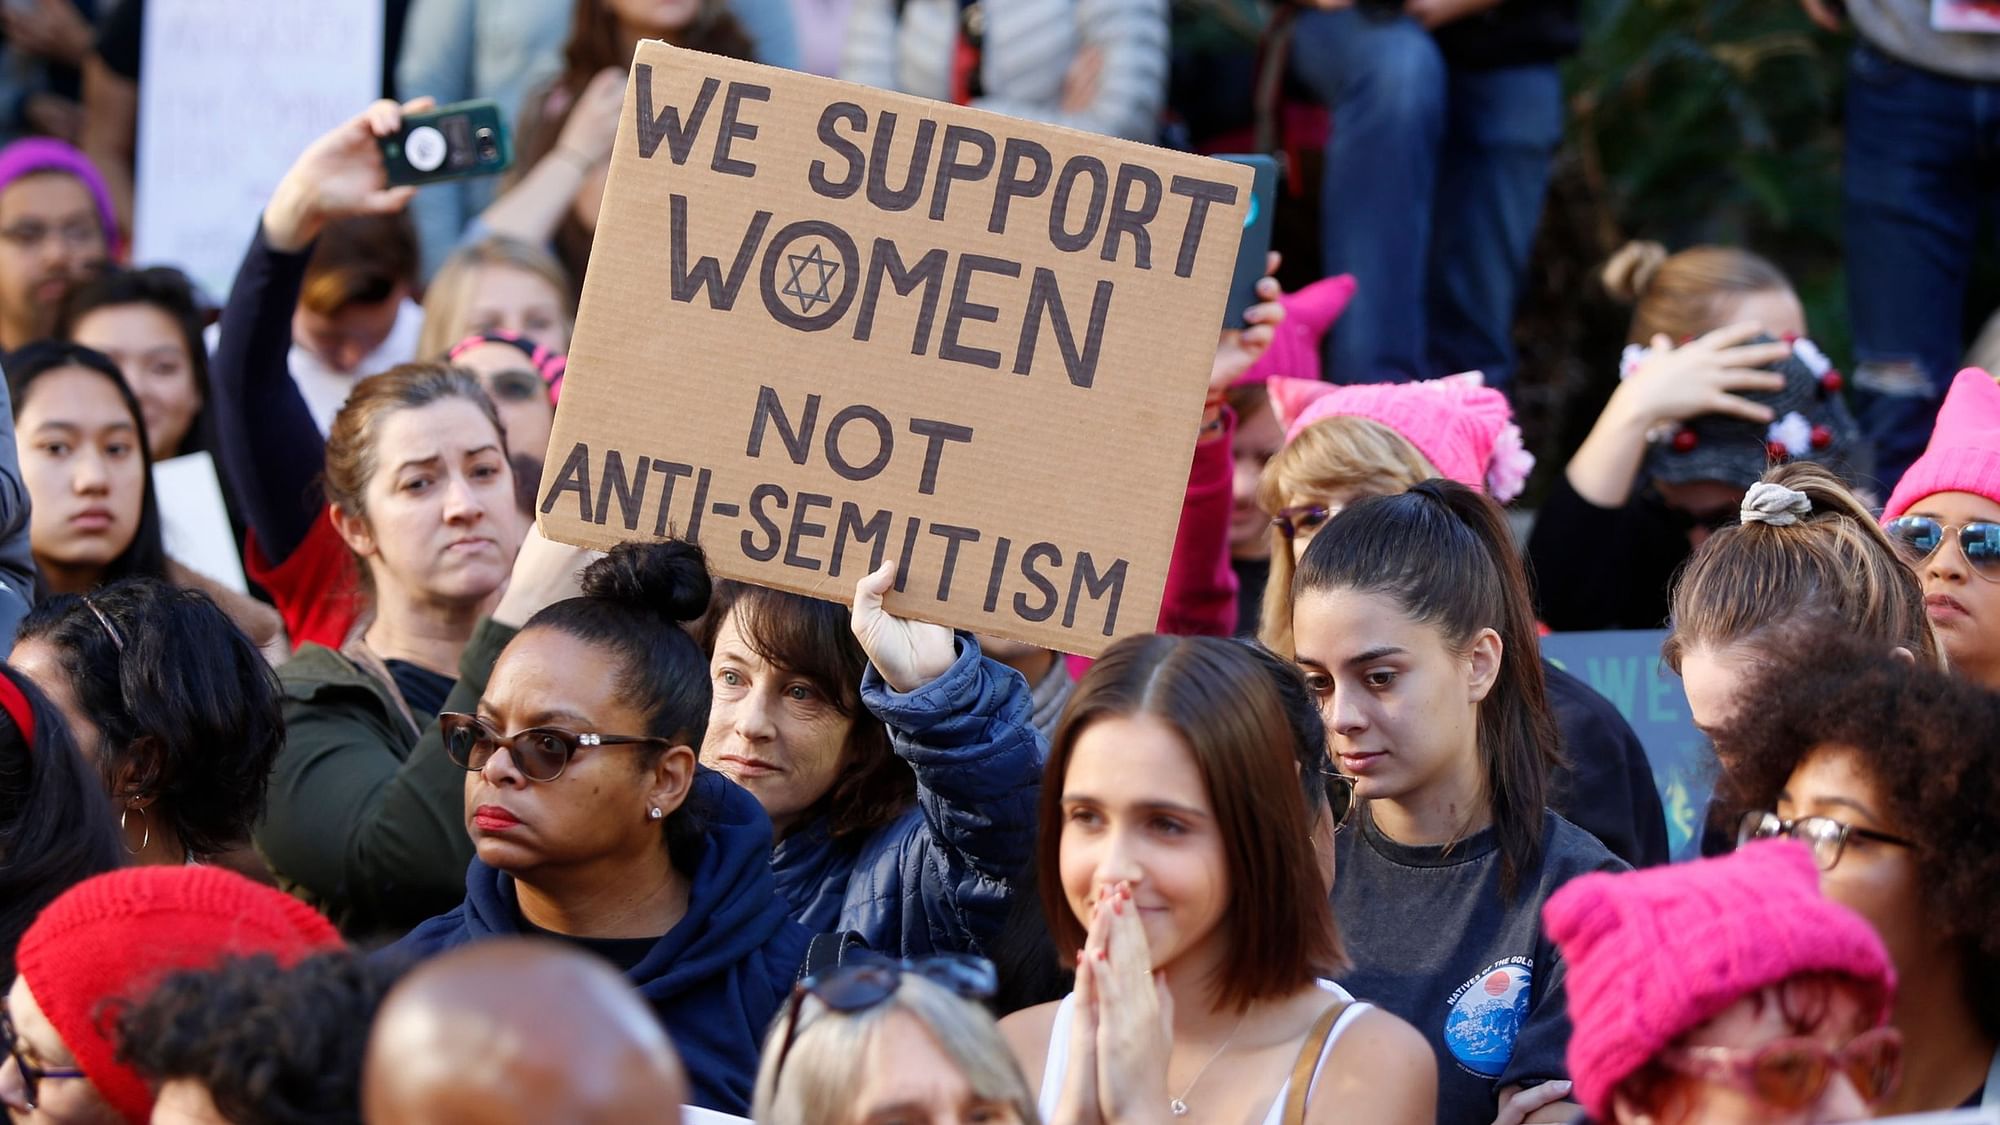 A demonstrators holds a sign against “Anti-Semitism” as she joins the Women’s March in Los Angeles on Saturday.